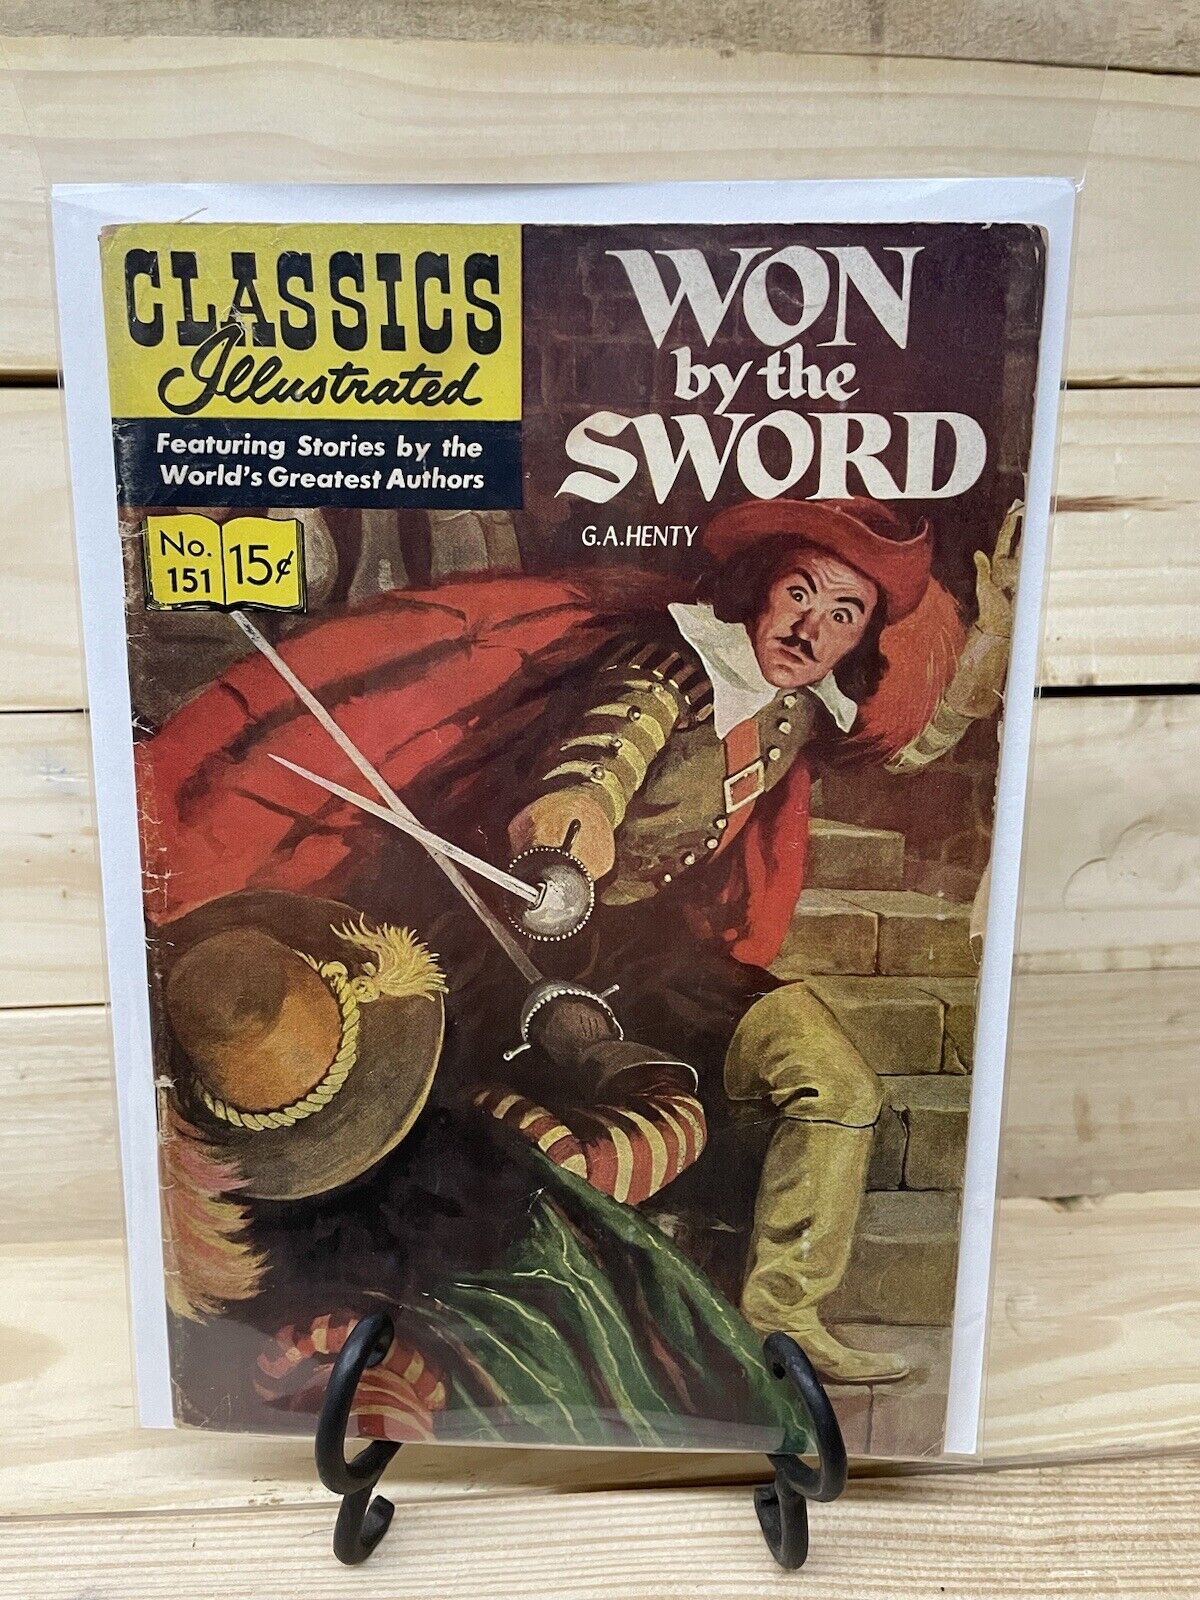 Classics Illustrated #151 Won by the Sword HRN 150 1st print VG 1959